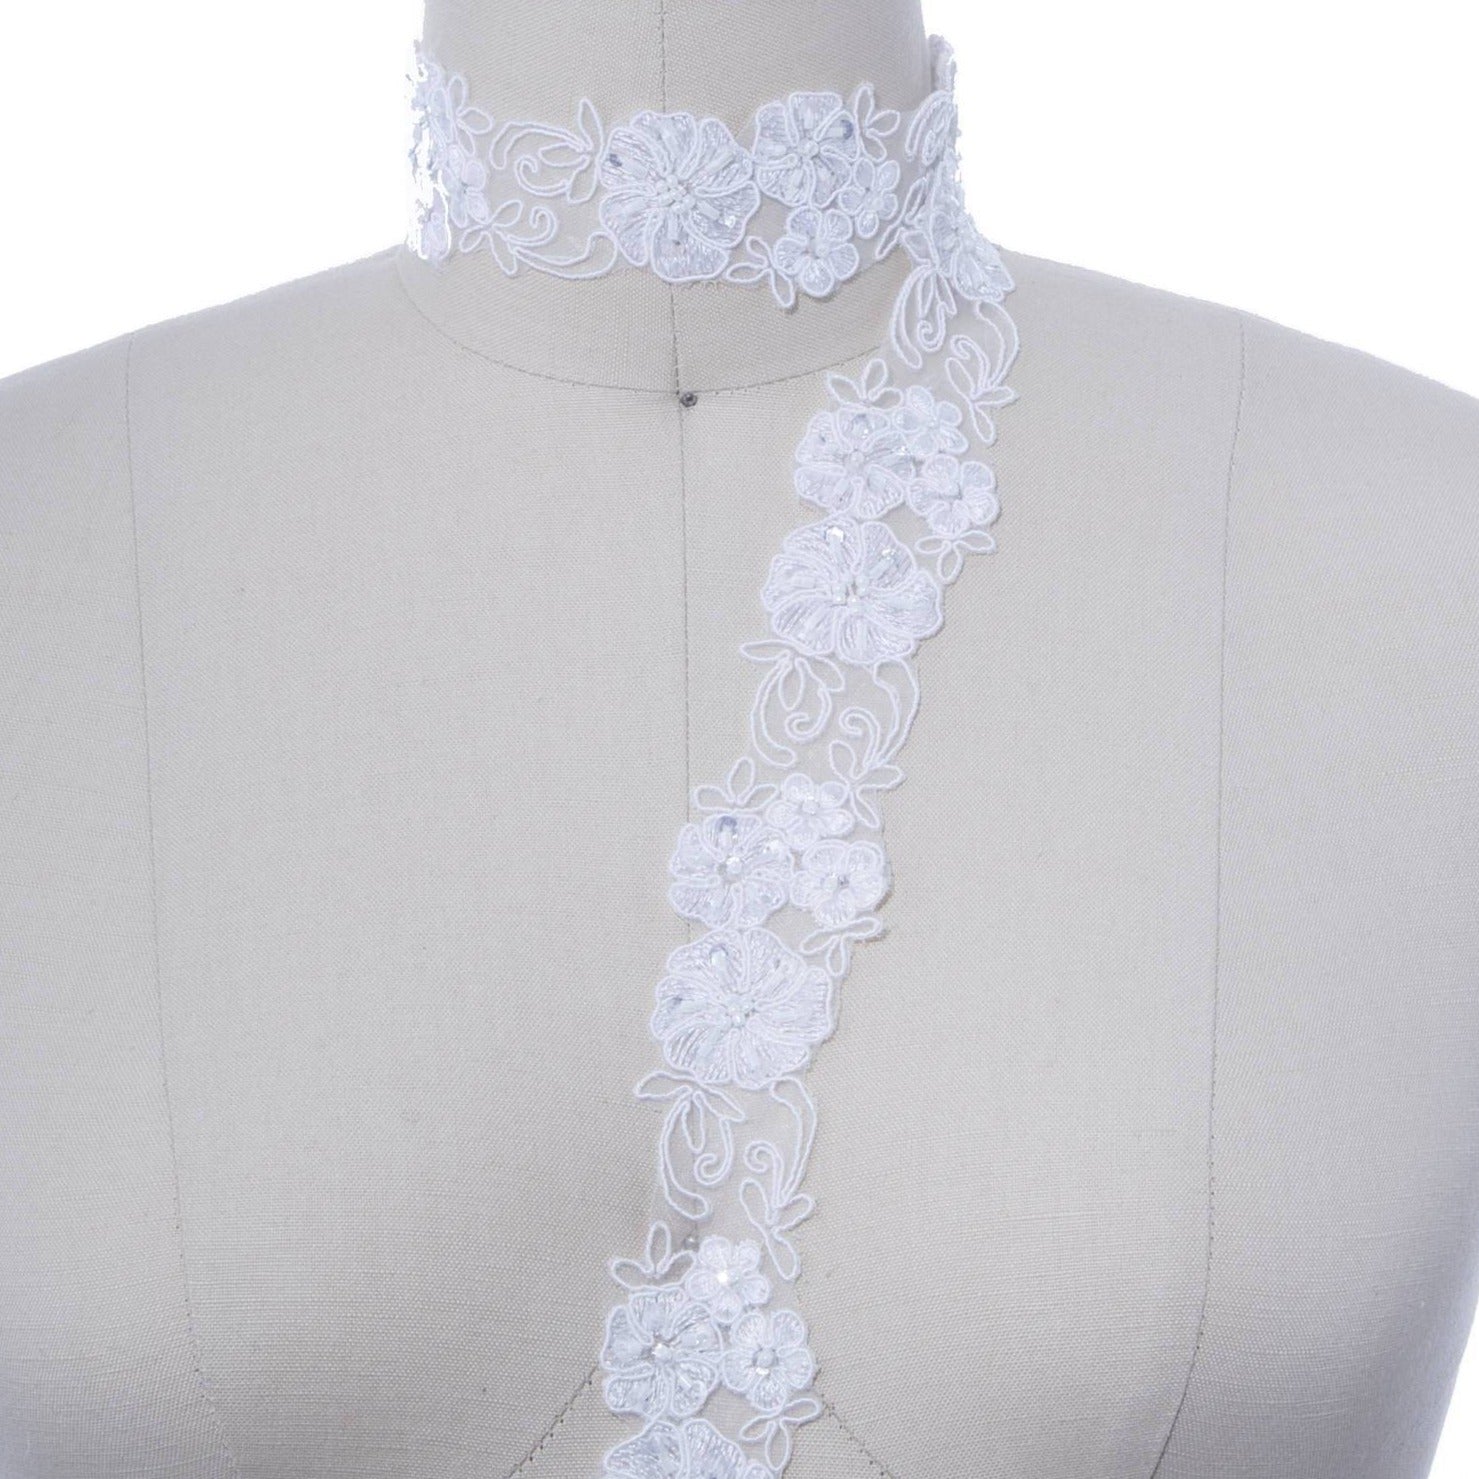 1 Yard 1.25" Ivory Sequin and Beaded Bridal Lace Floral Veil Chiffon Trim